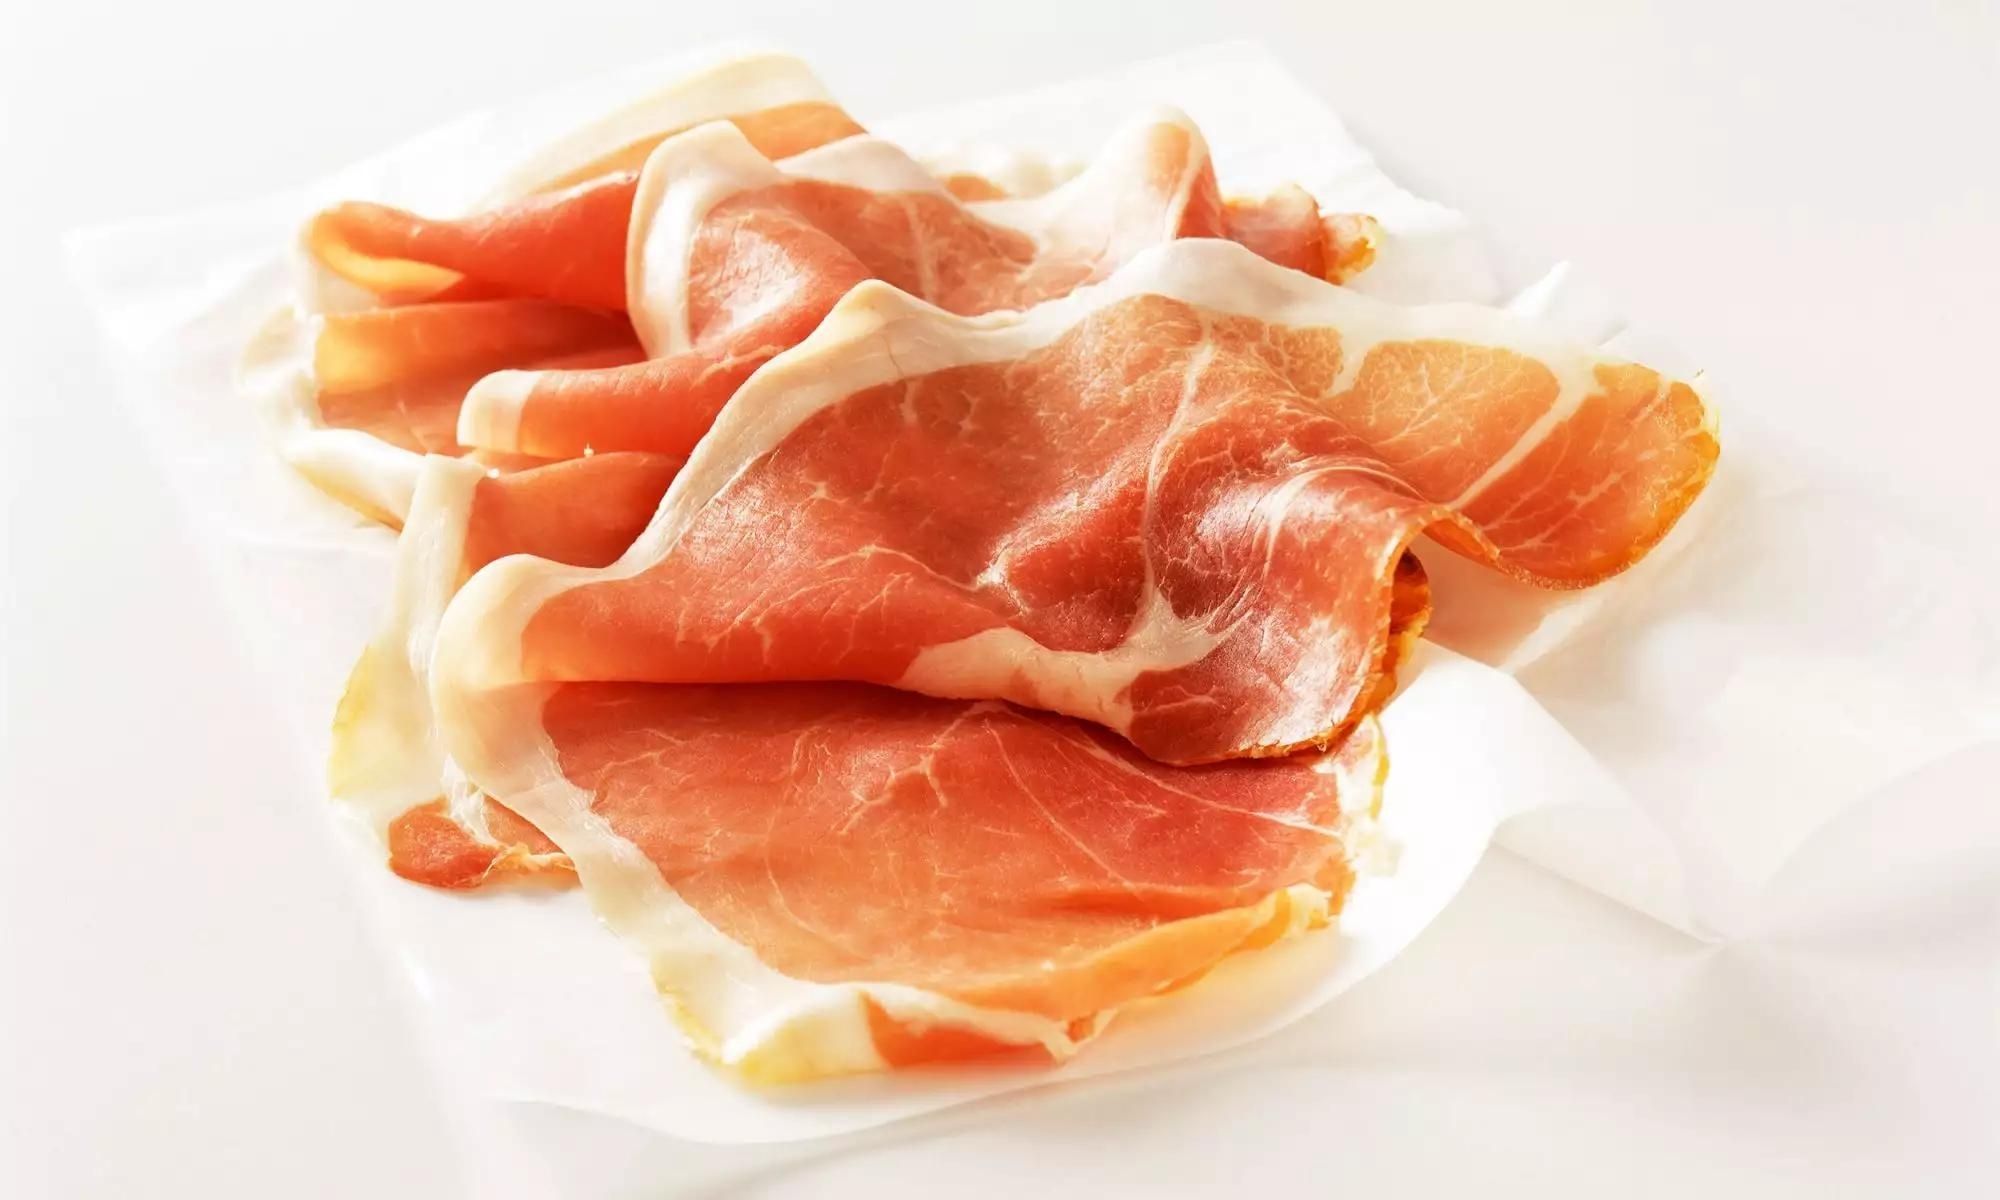 How To Store Prosciutto After Opening